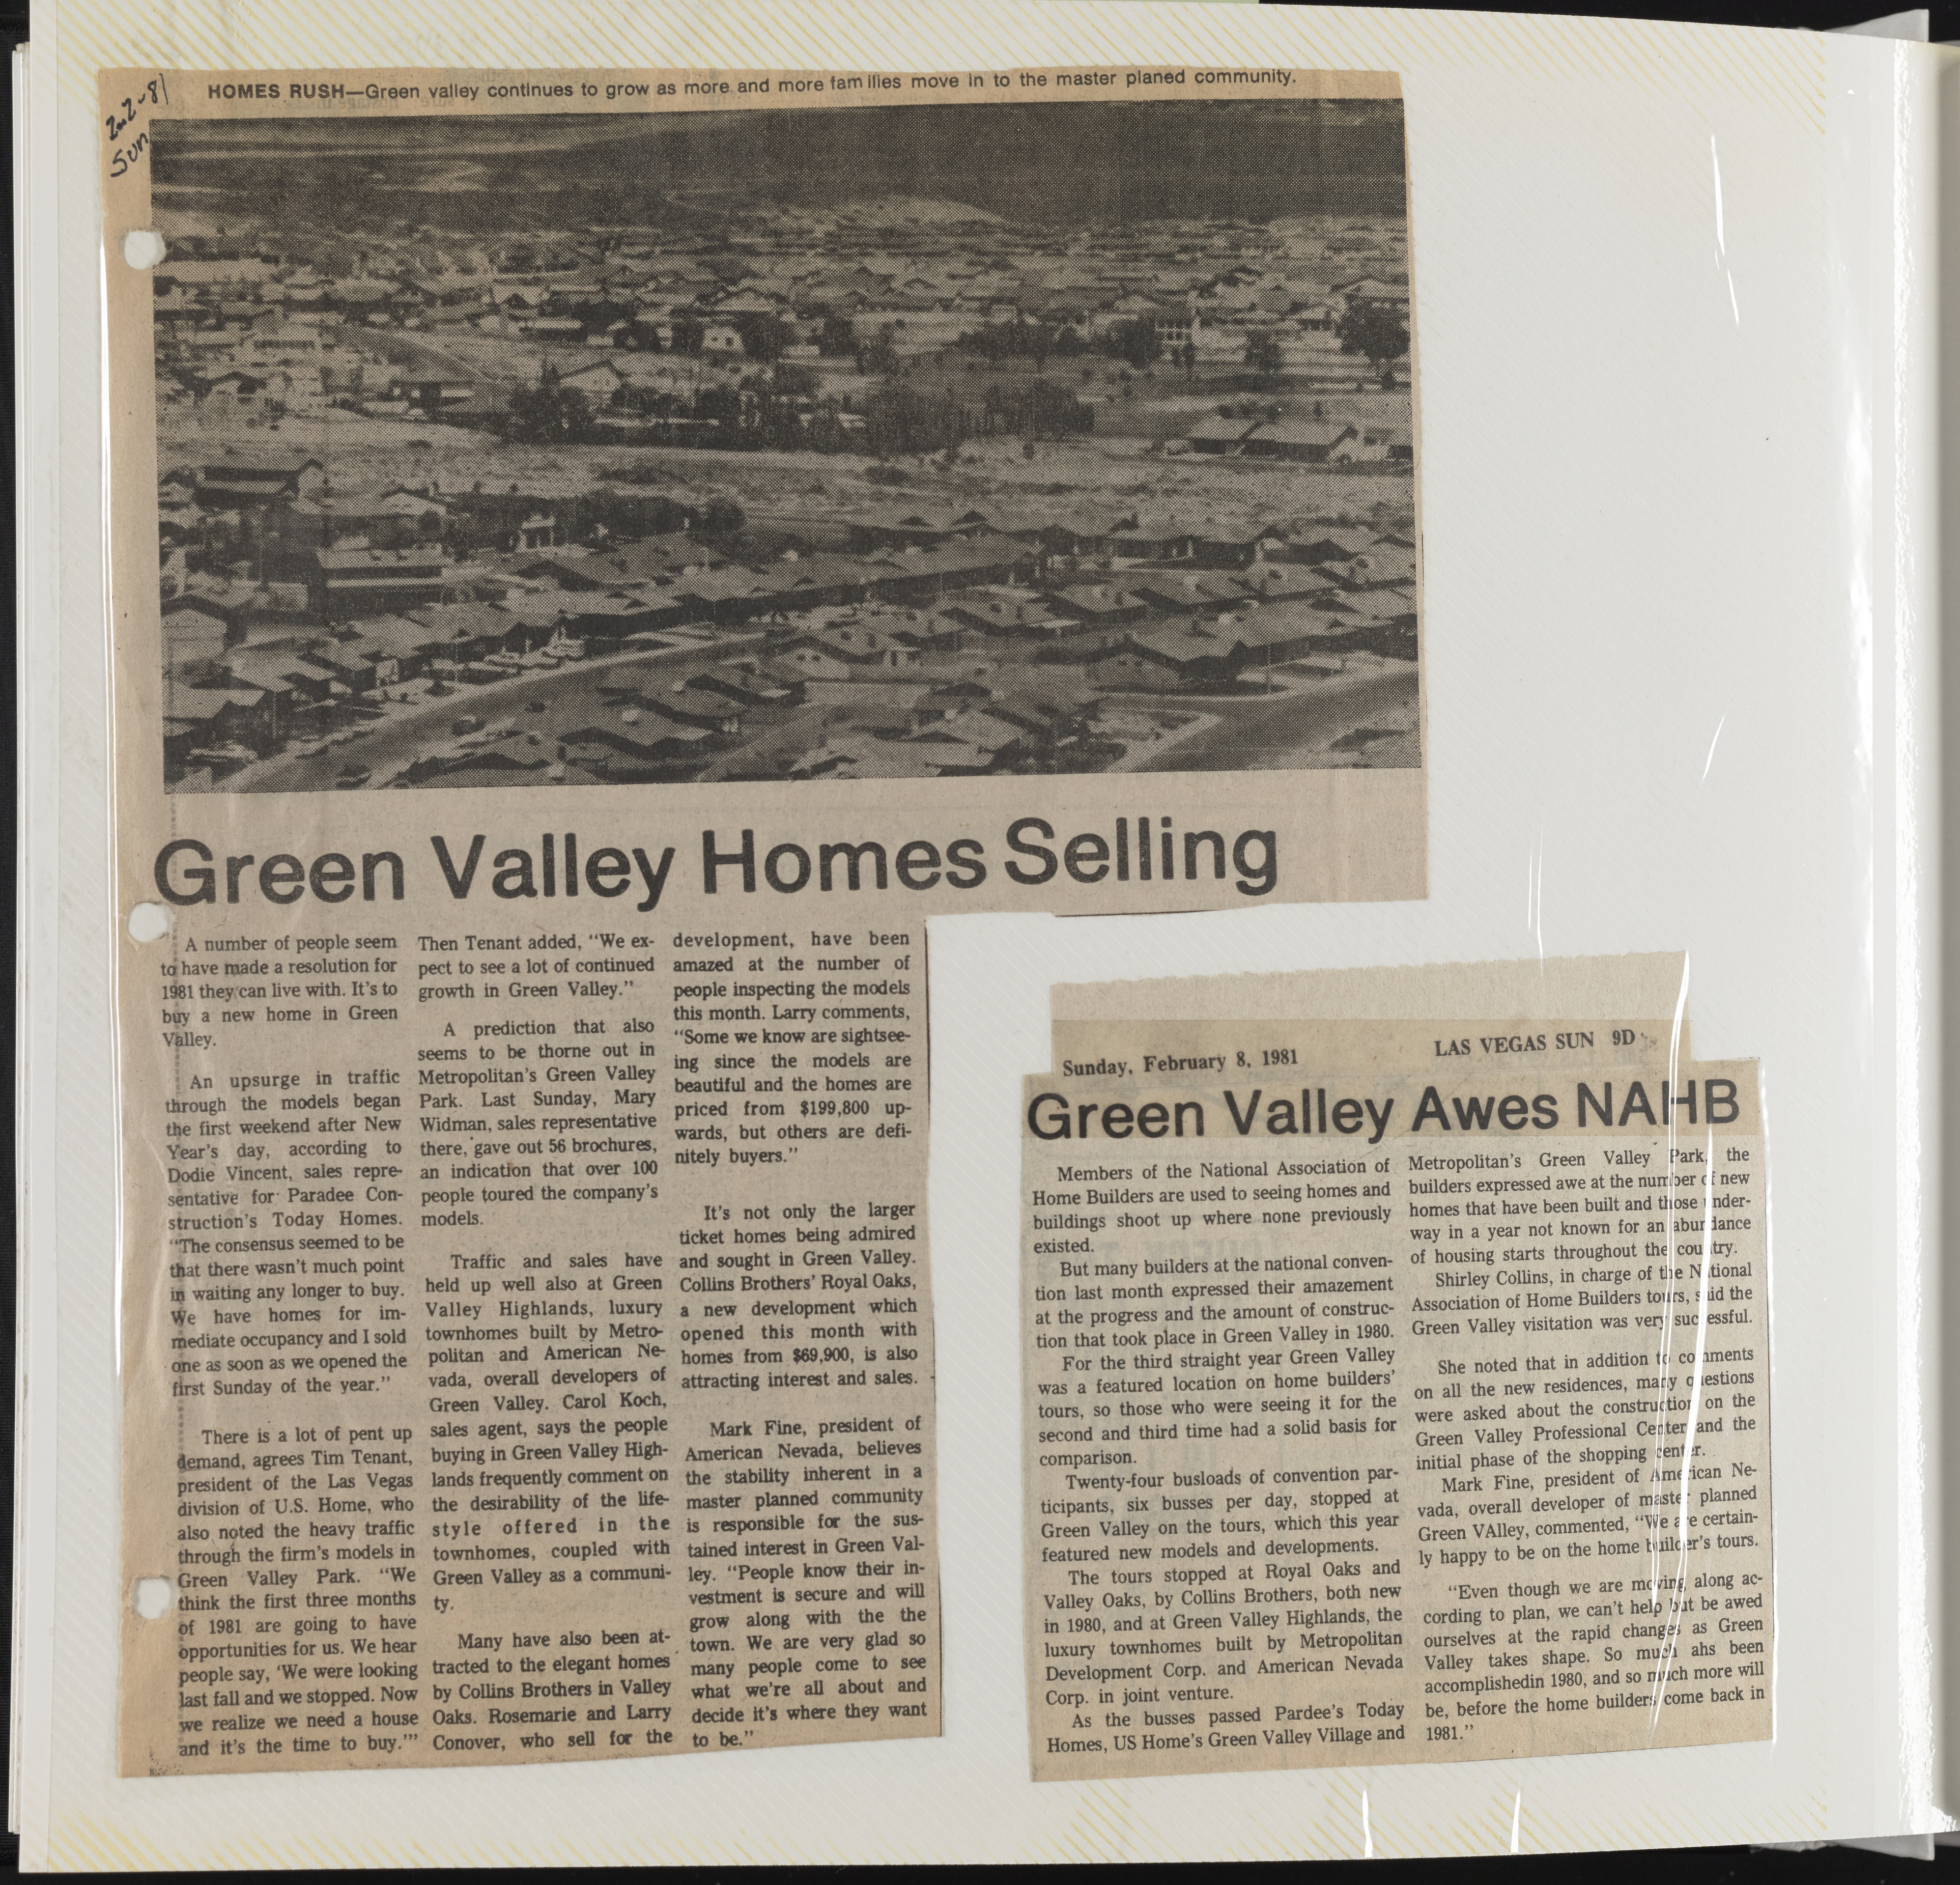 Newspaper clippings about Green Valley residential areas, 1981